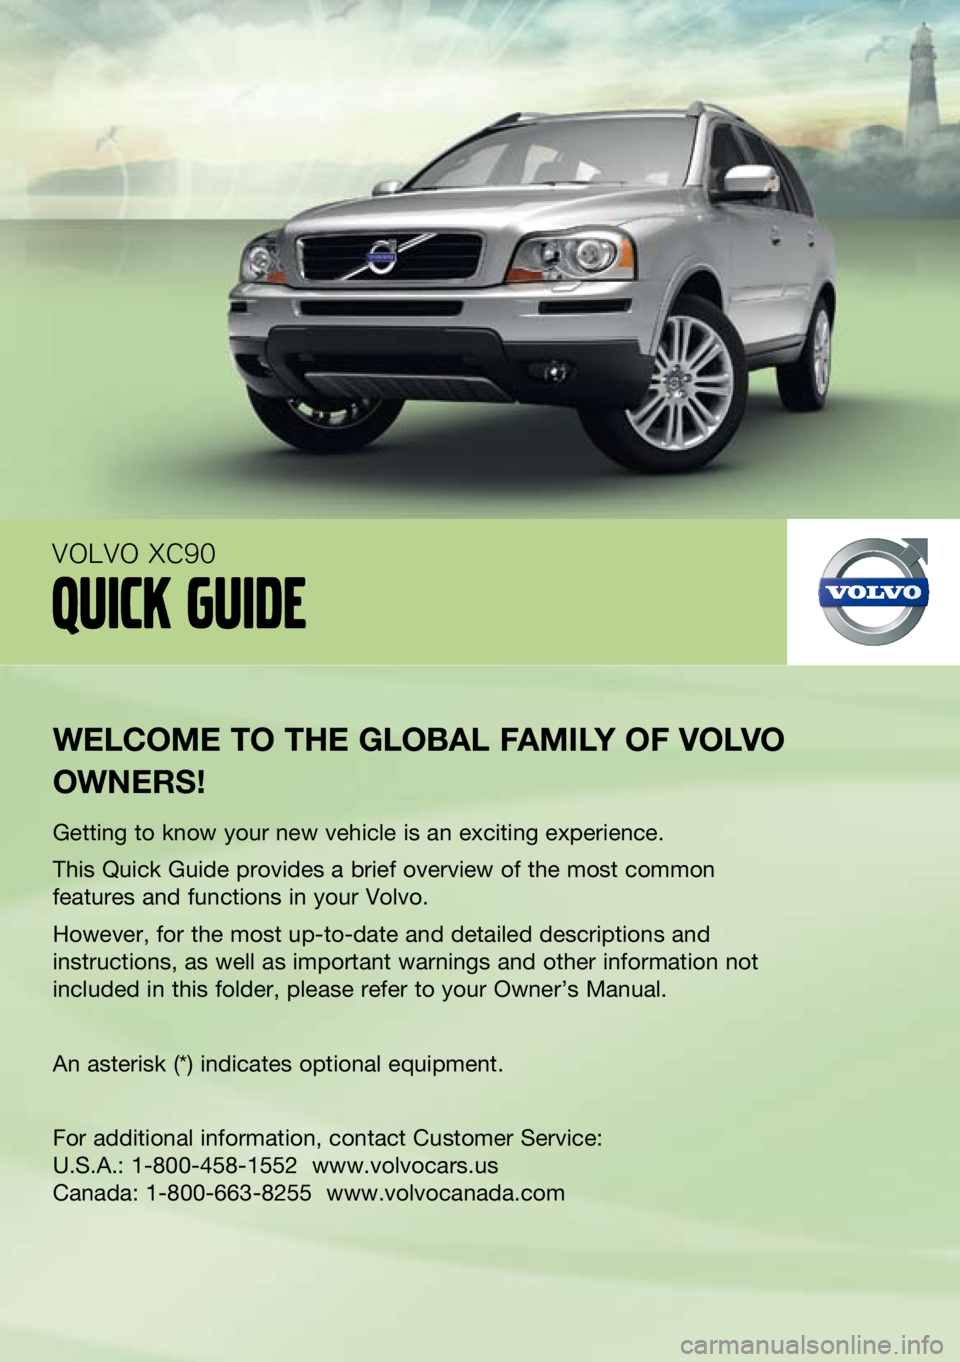 VOLVO XC90 2011  Quick Guide 
welcome to the  global F amily oF  volvo 
owners !
Getting to know your new vehicle is an exciting experience.
This Quick Guide provides a brief overview of the most common 
features and functions in